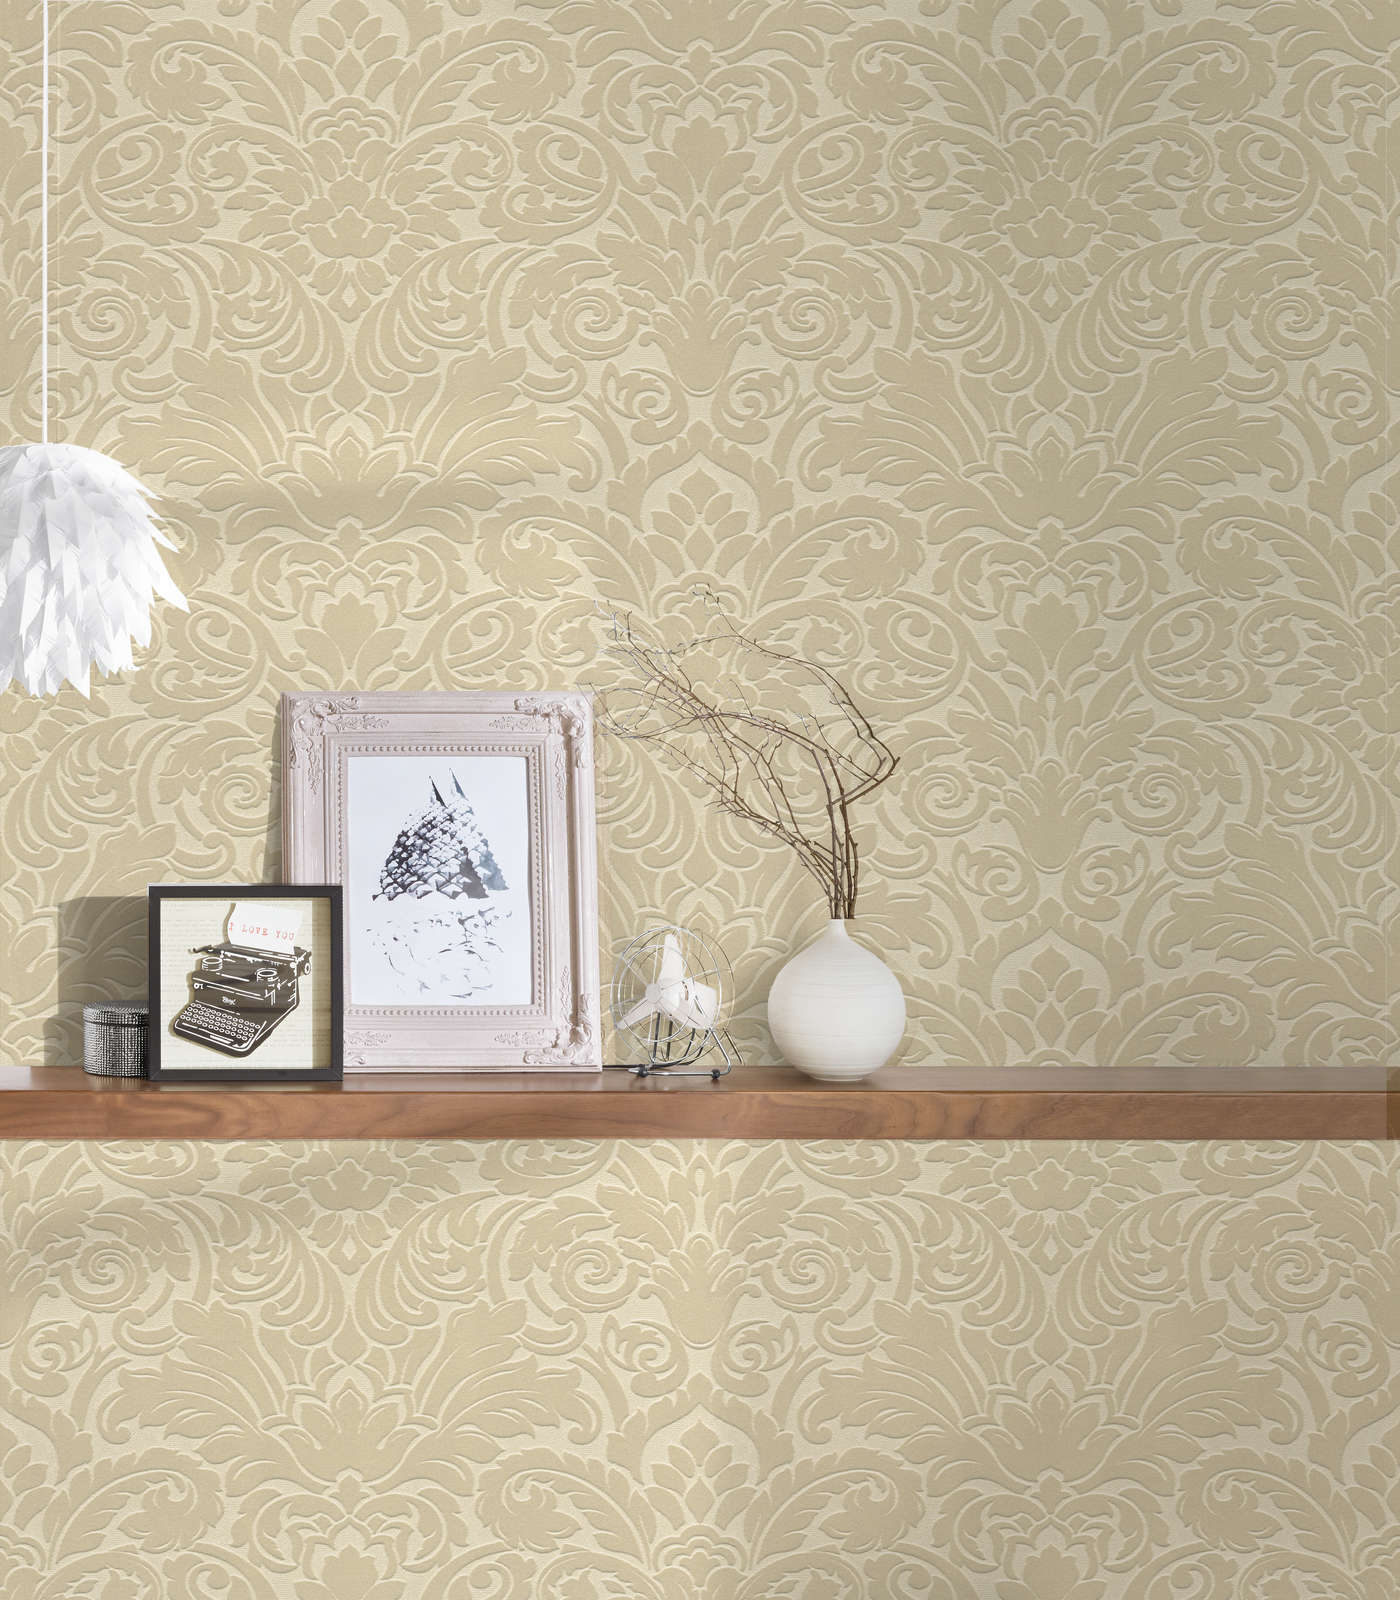             Baroque wallpaper with floral pattern & 3D structure - beige
        